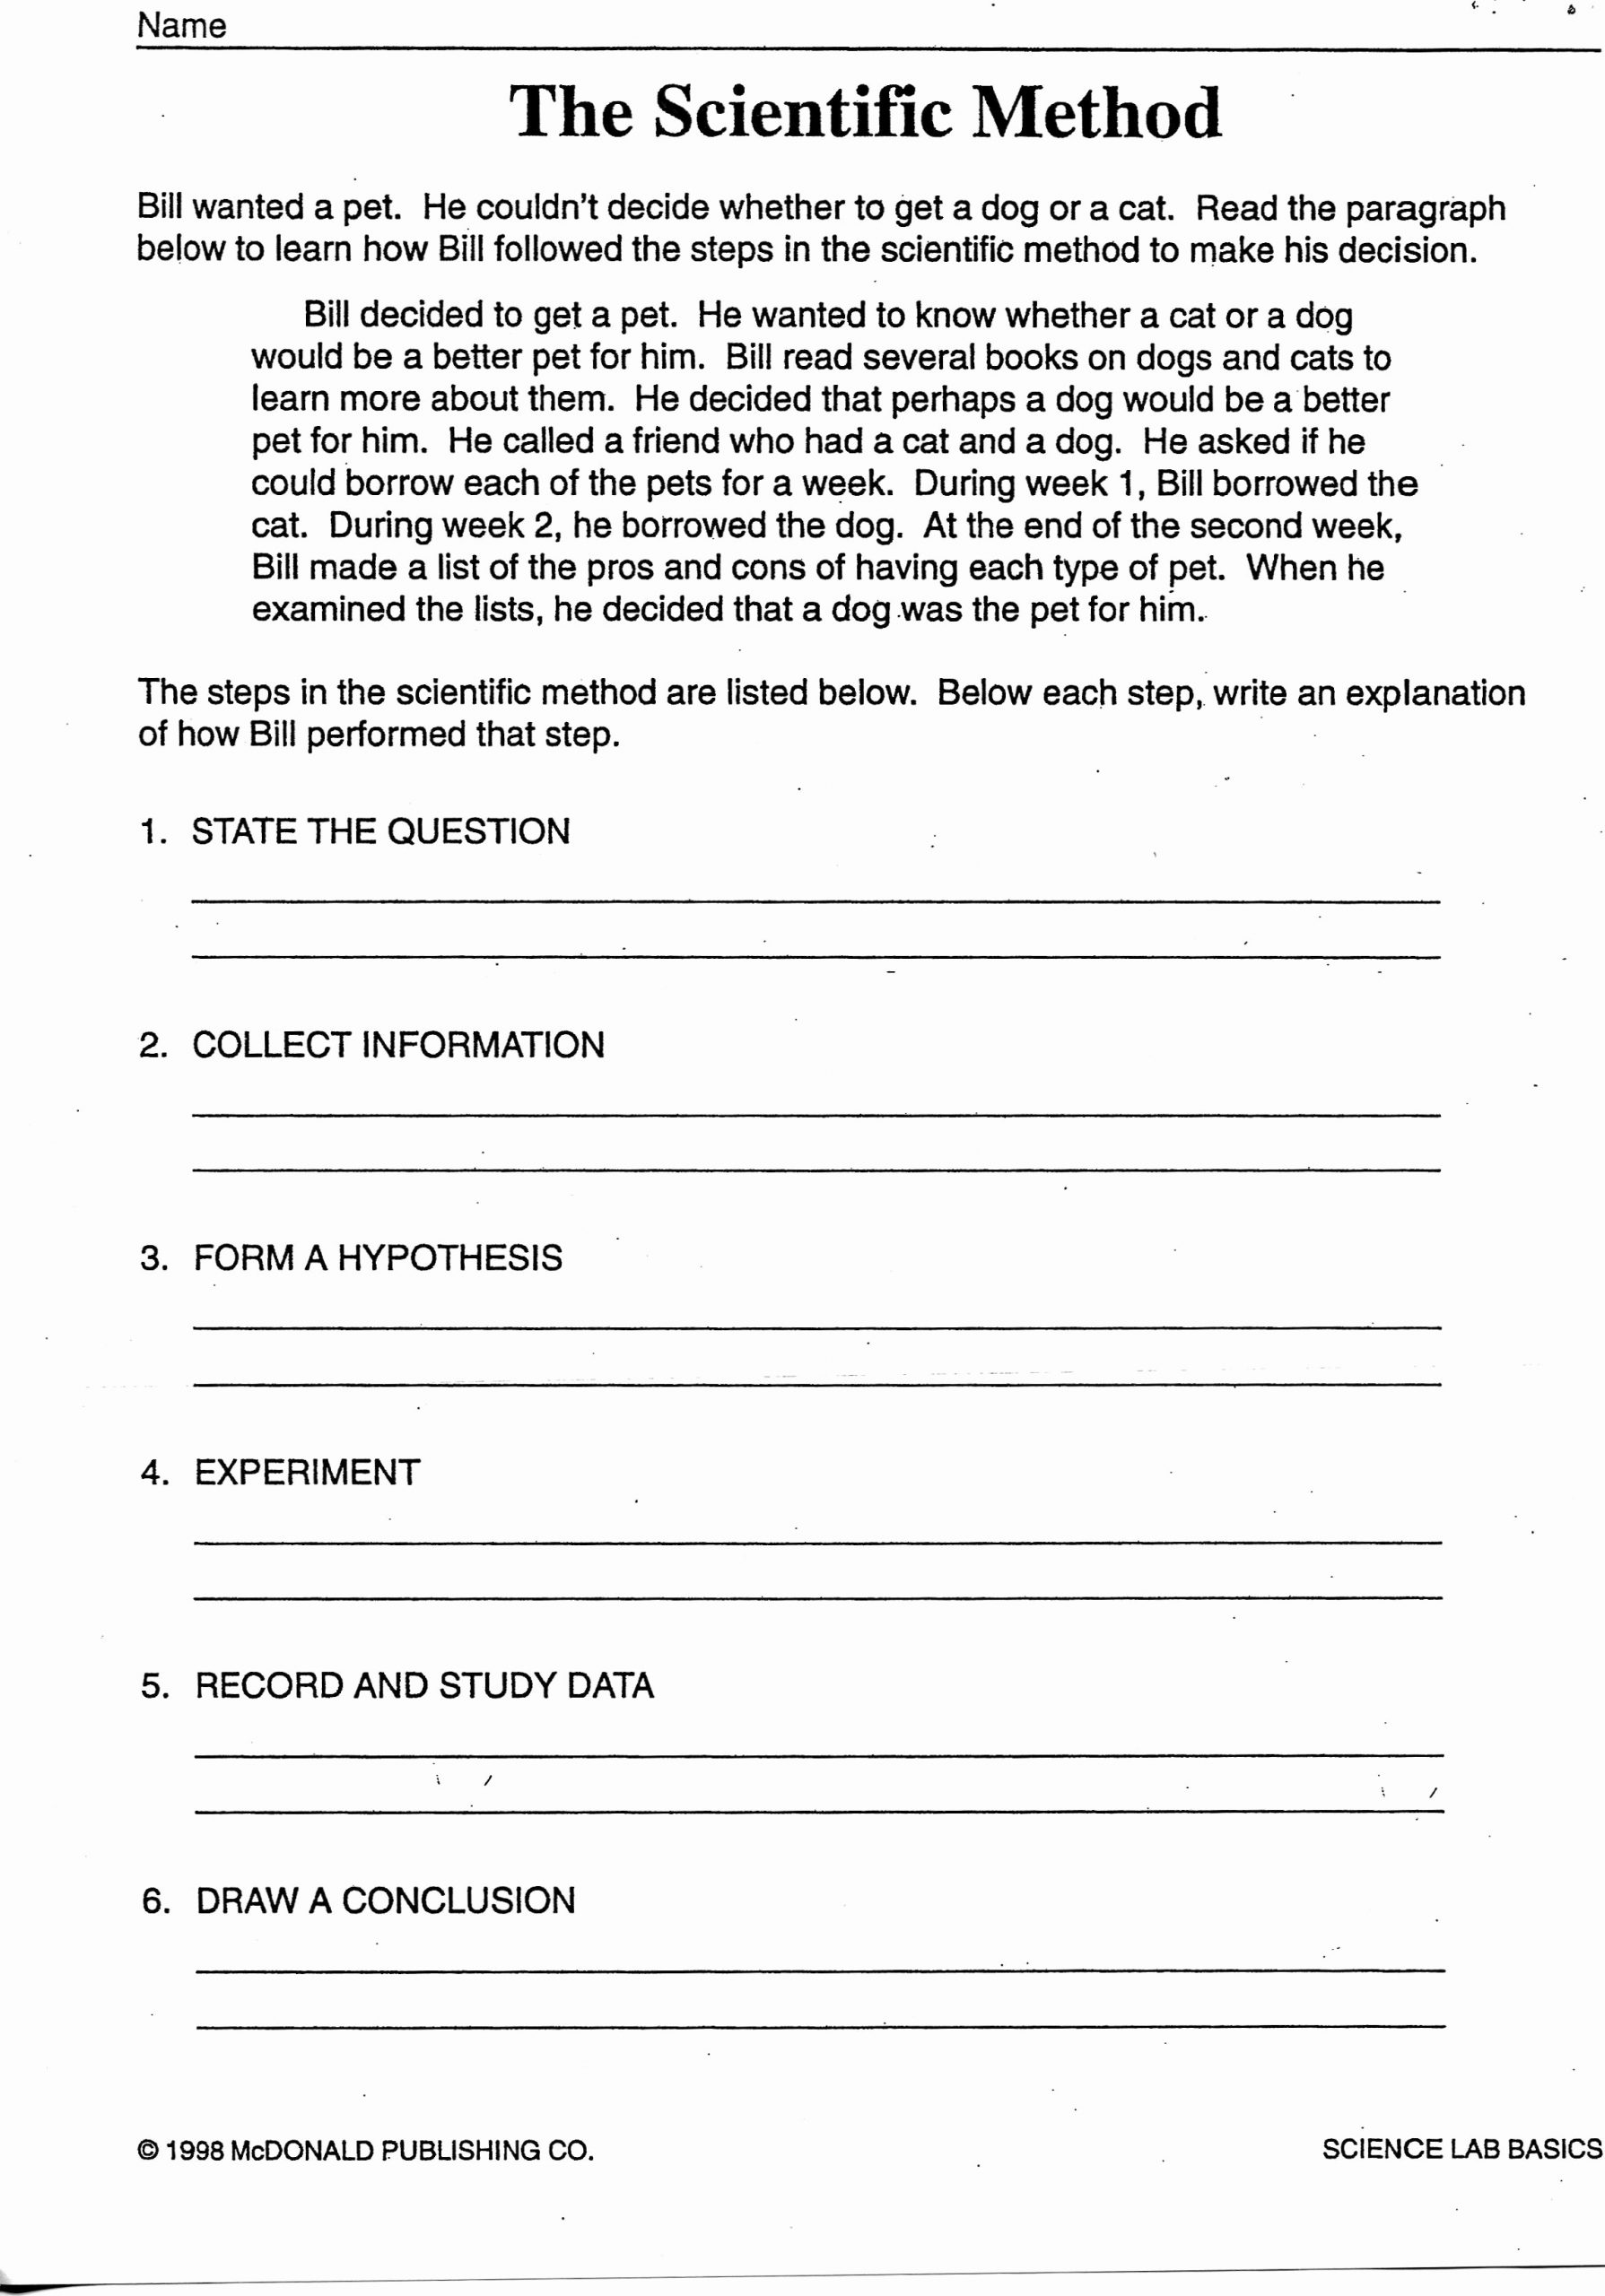 Free 6th Grade Science Worksheets Unique Sly 6th Grade Science Printable Worksheets